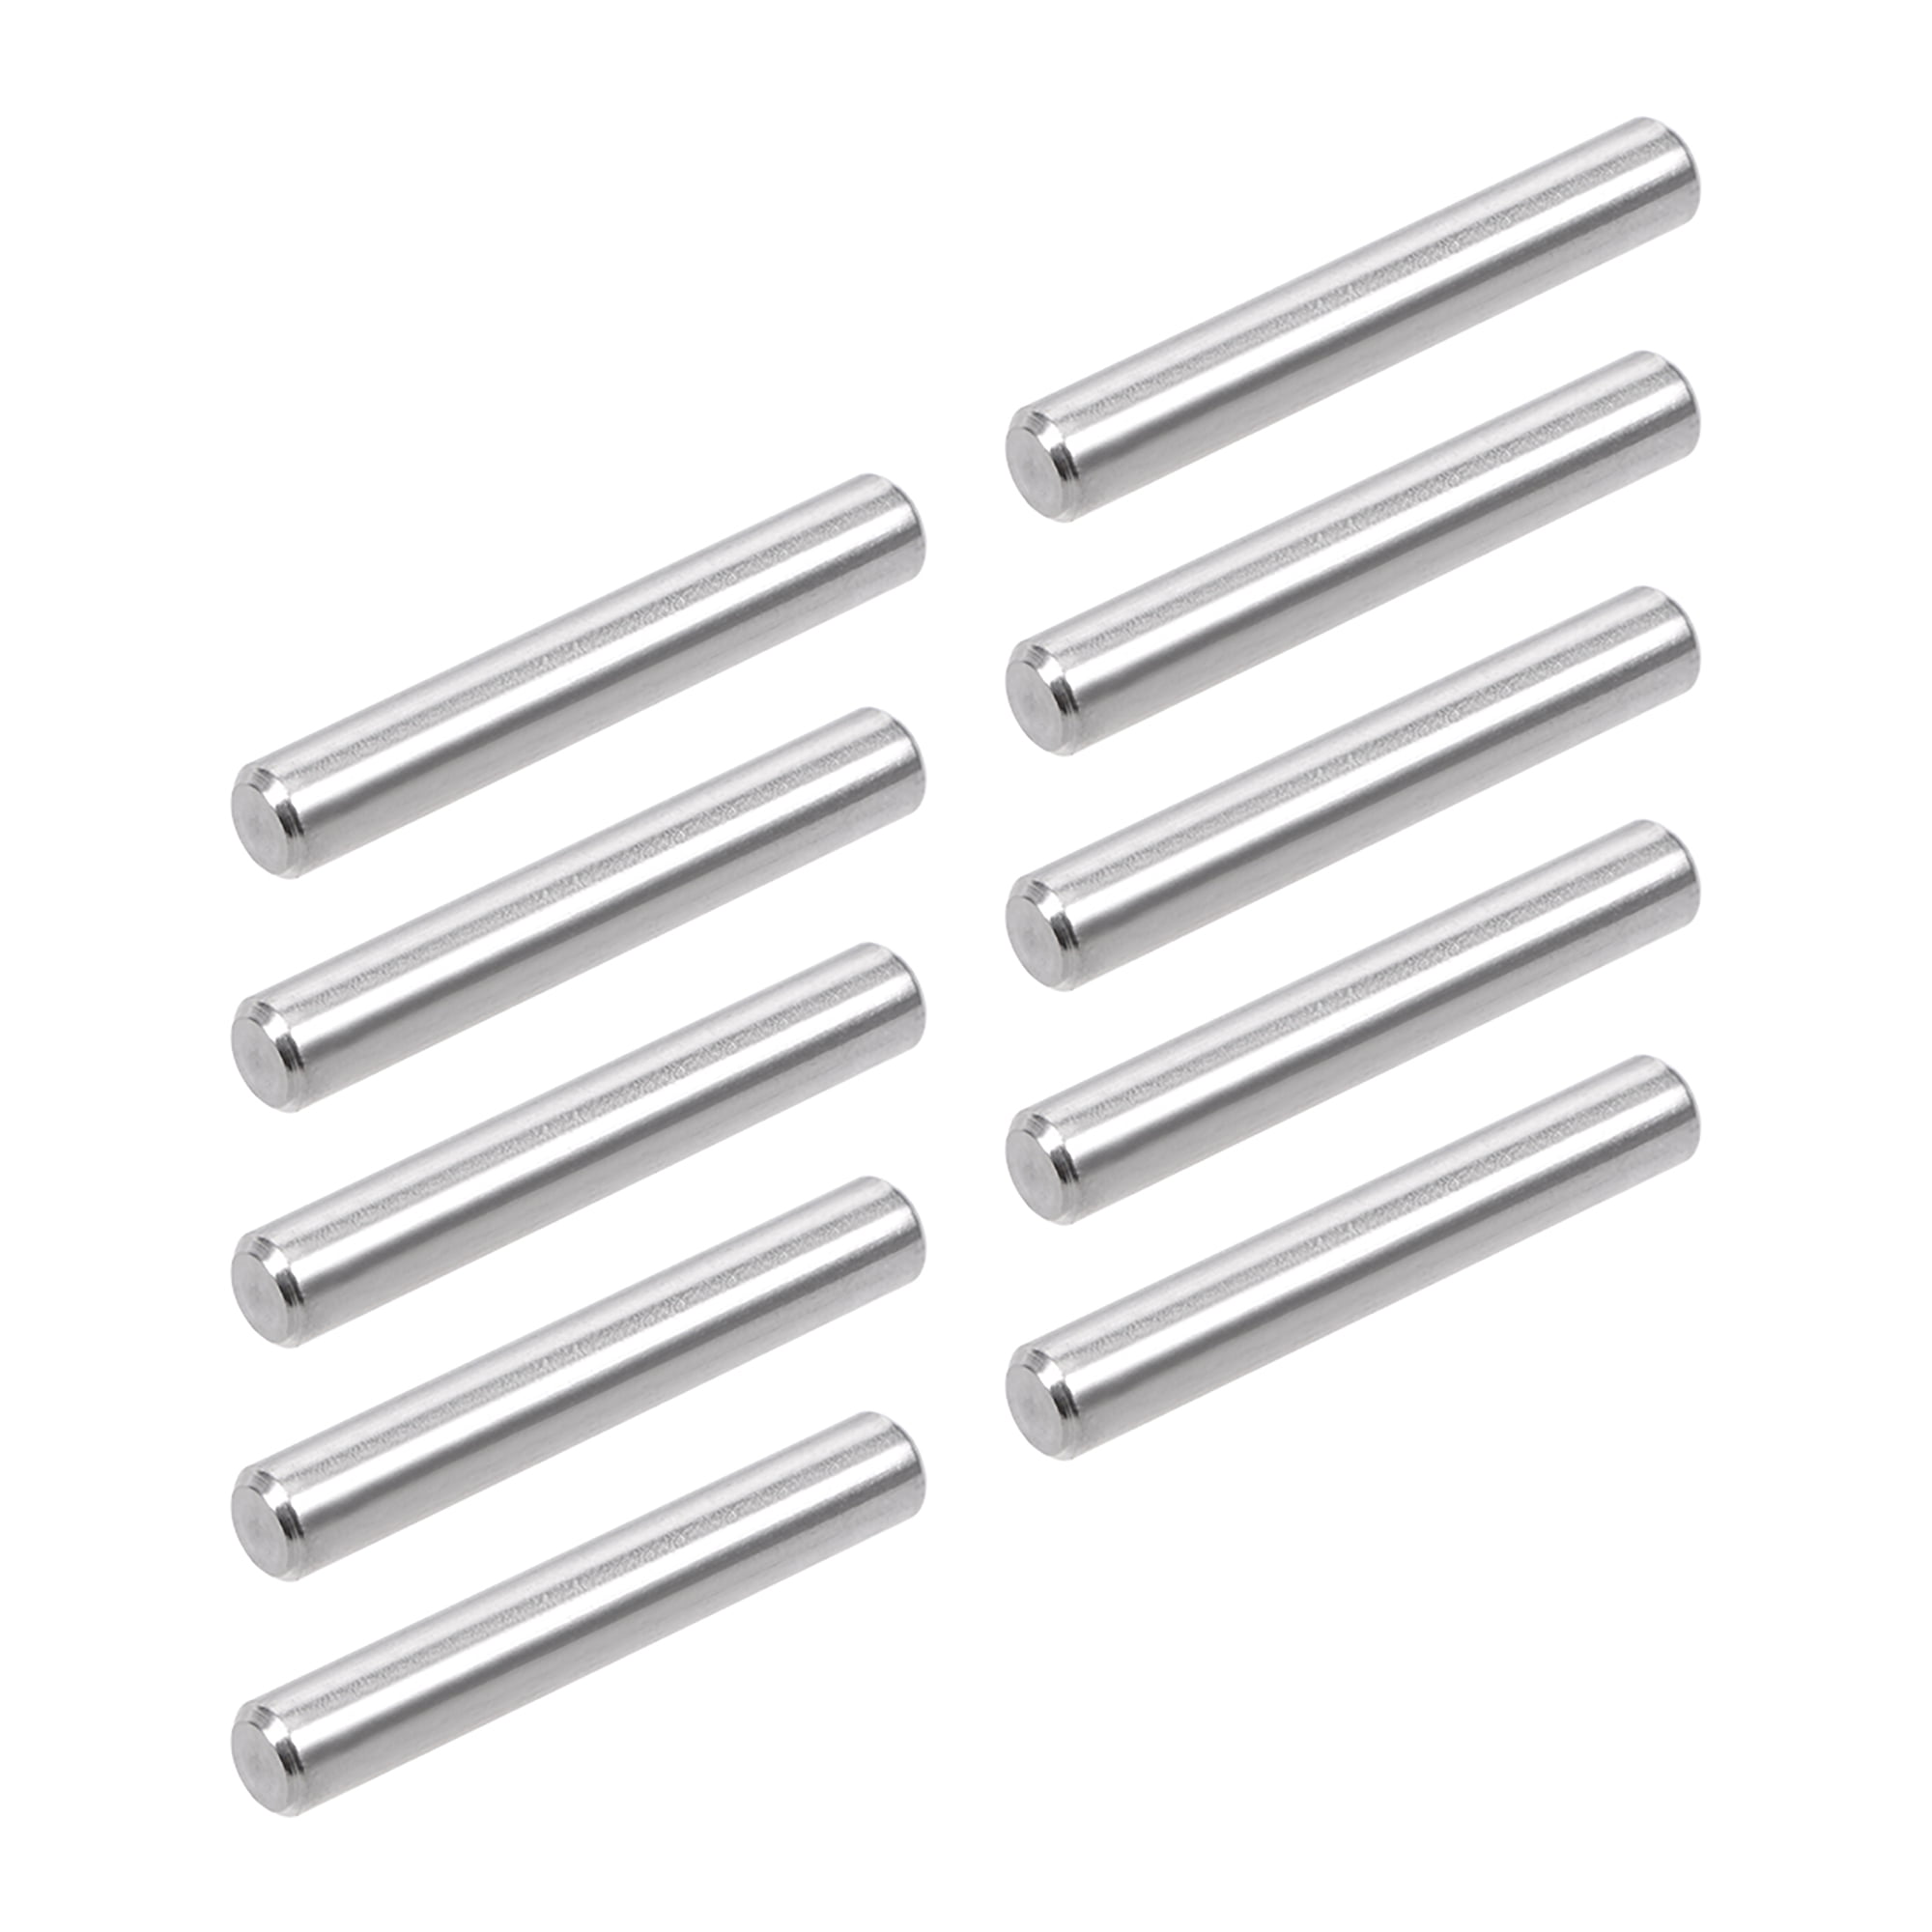 10Pcs 6mmx40mm Dowel Pin 304 Stainless Steel Wood Bunk Bed Dowel Pins ...